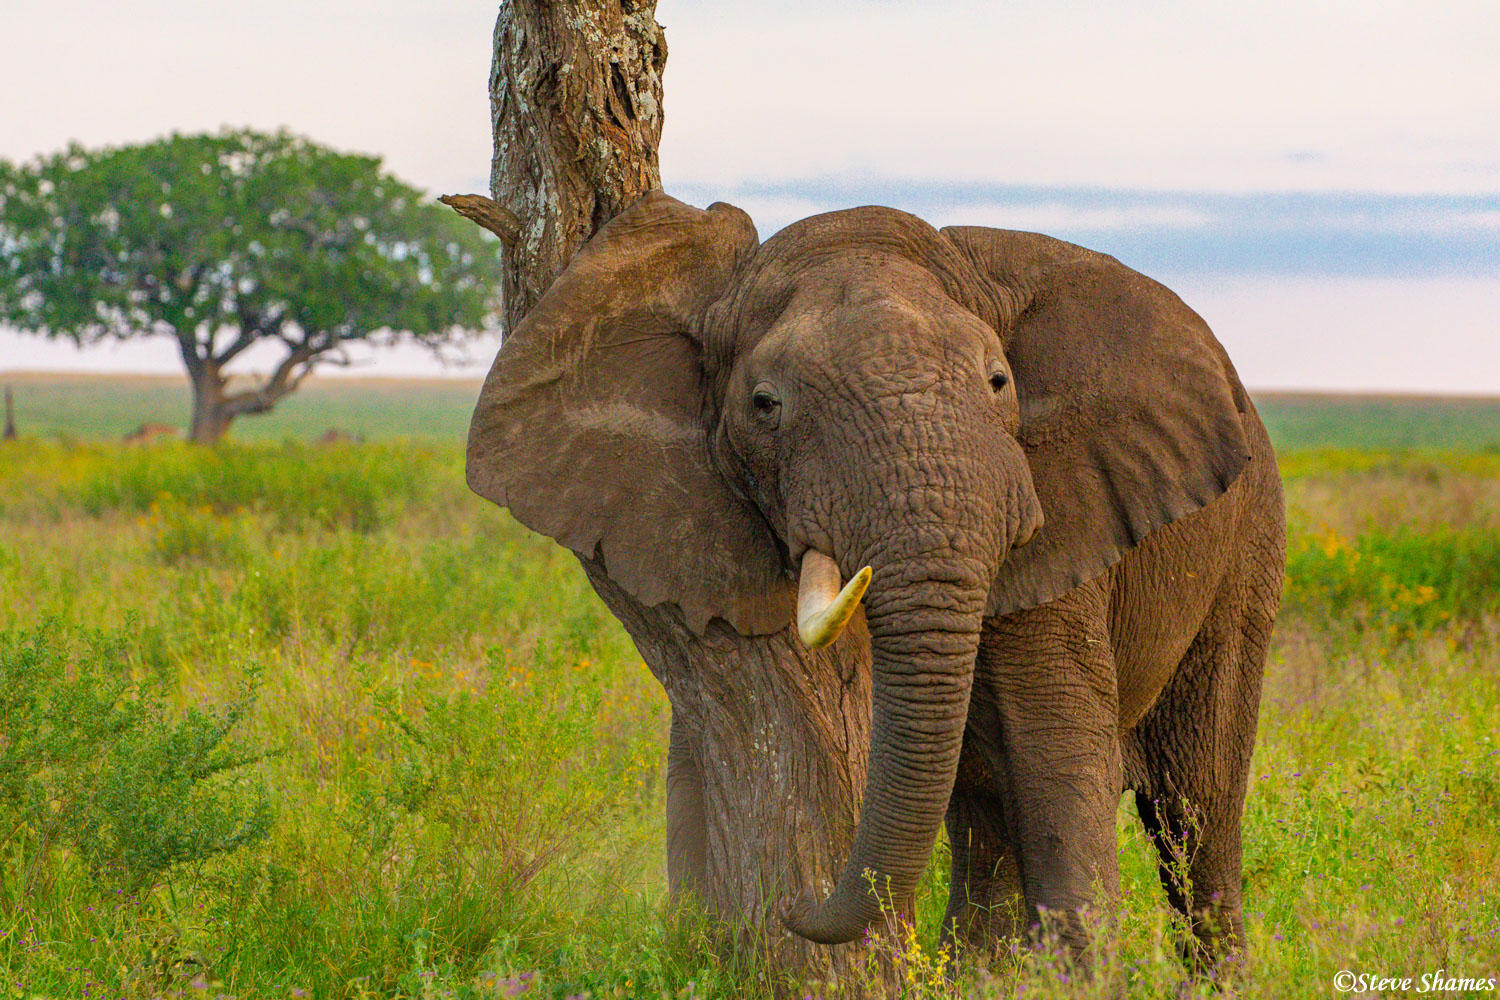 Here's a one tusker elephant, scratching his ear on a tree.